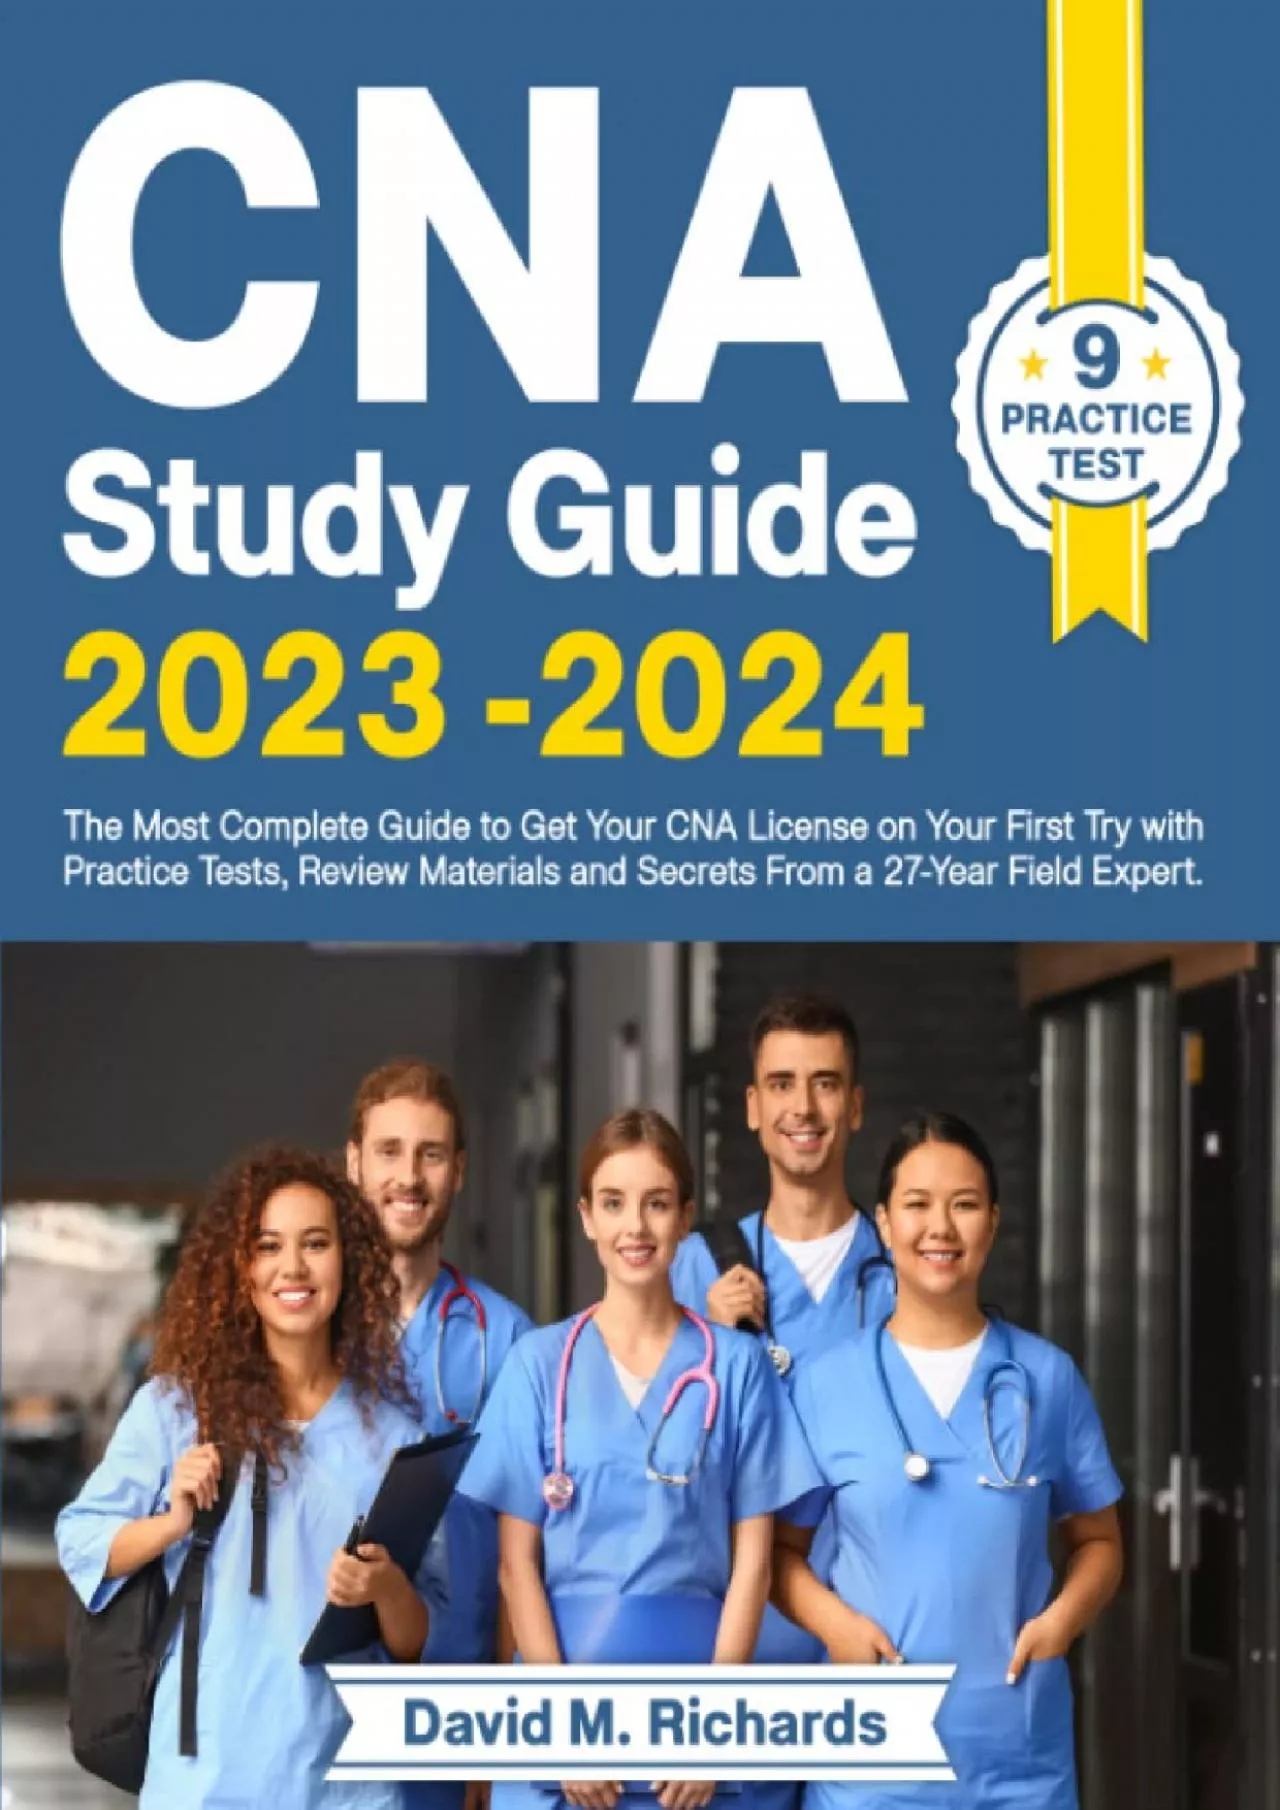 [READ] CNA Study Guide 2023-2024: The Most Complete Guide to Get Your CNA License on Your